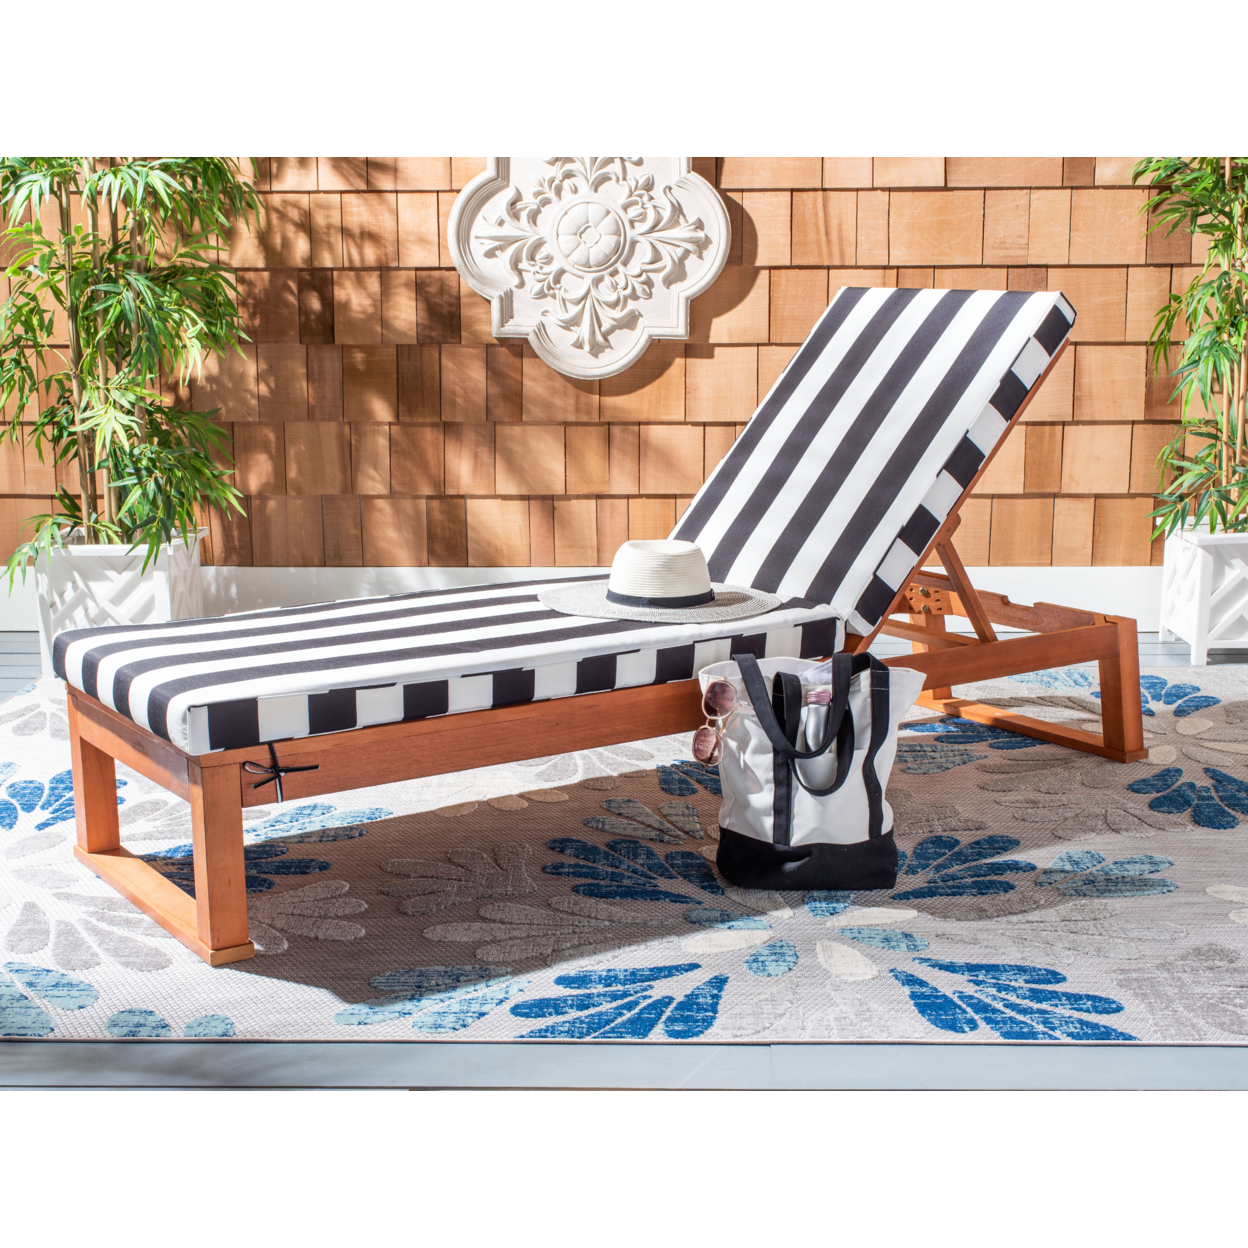 SAFAVIEH Outdoor Collection Solano Chaise Sunlounger Natural/Black